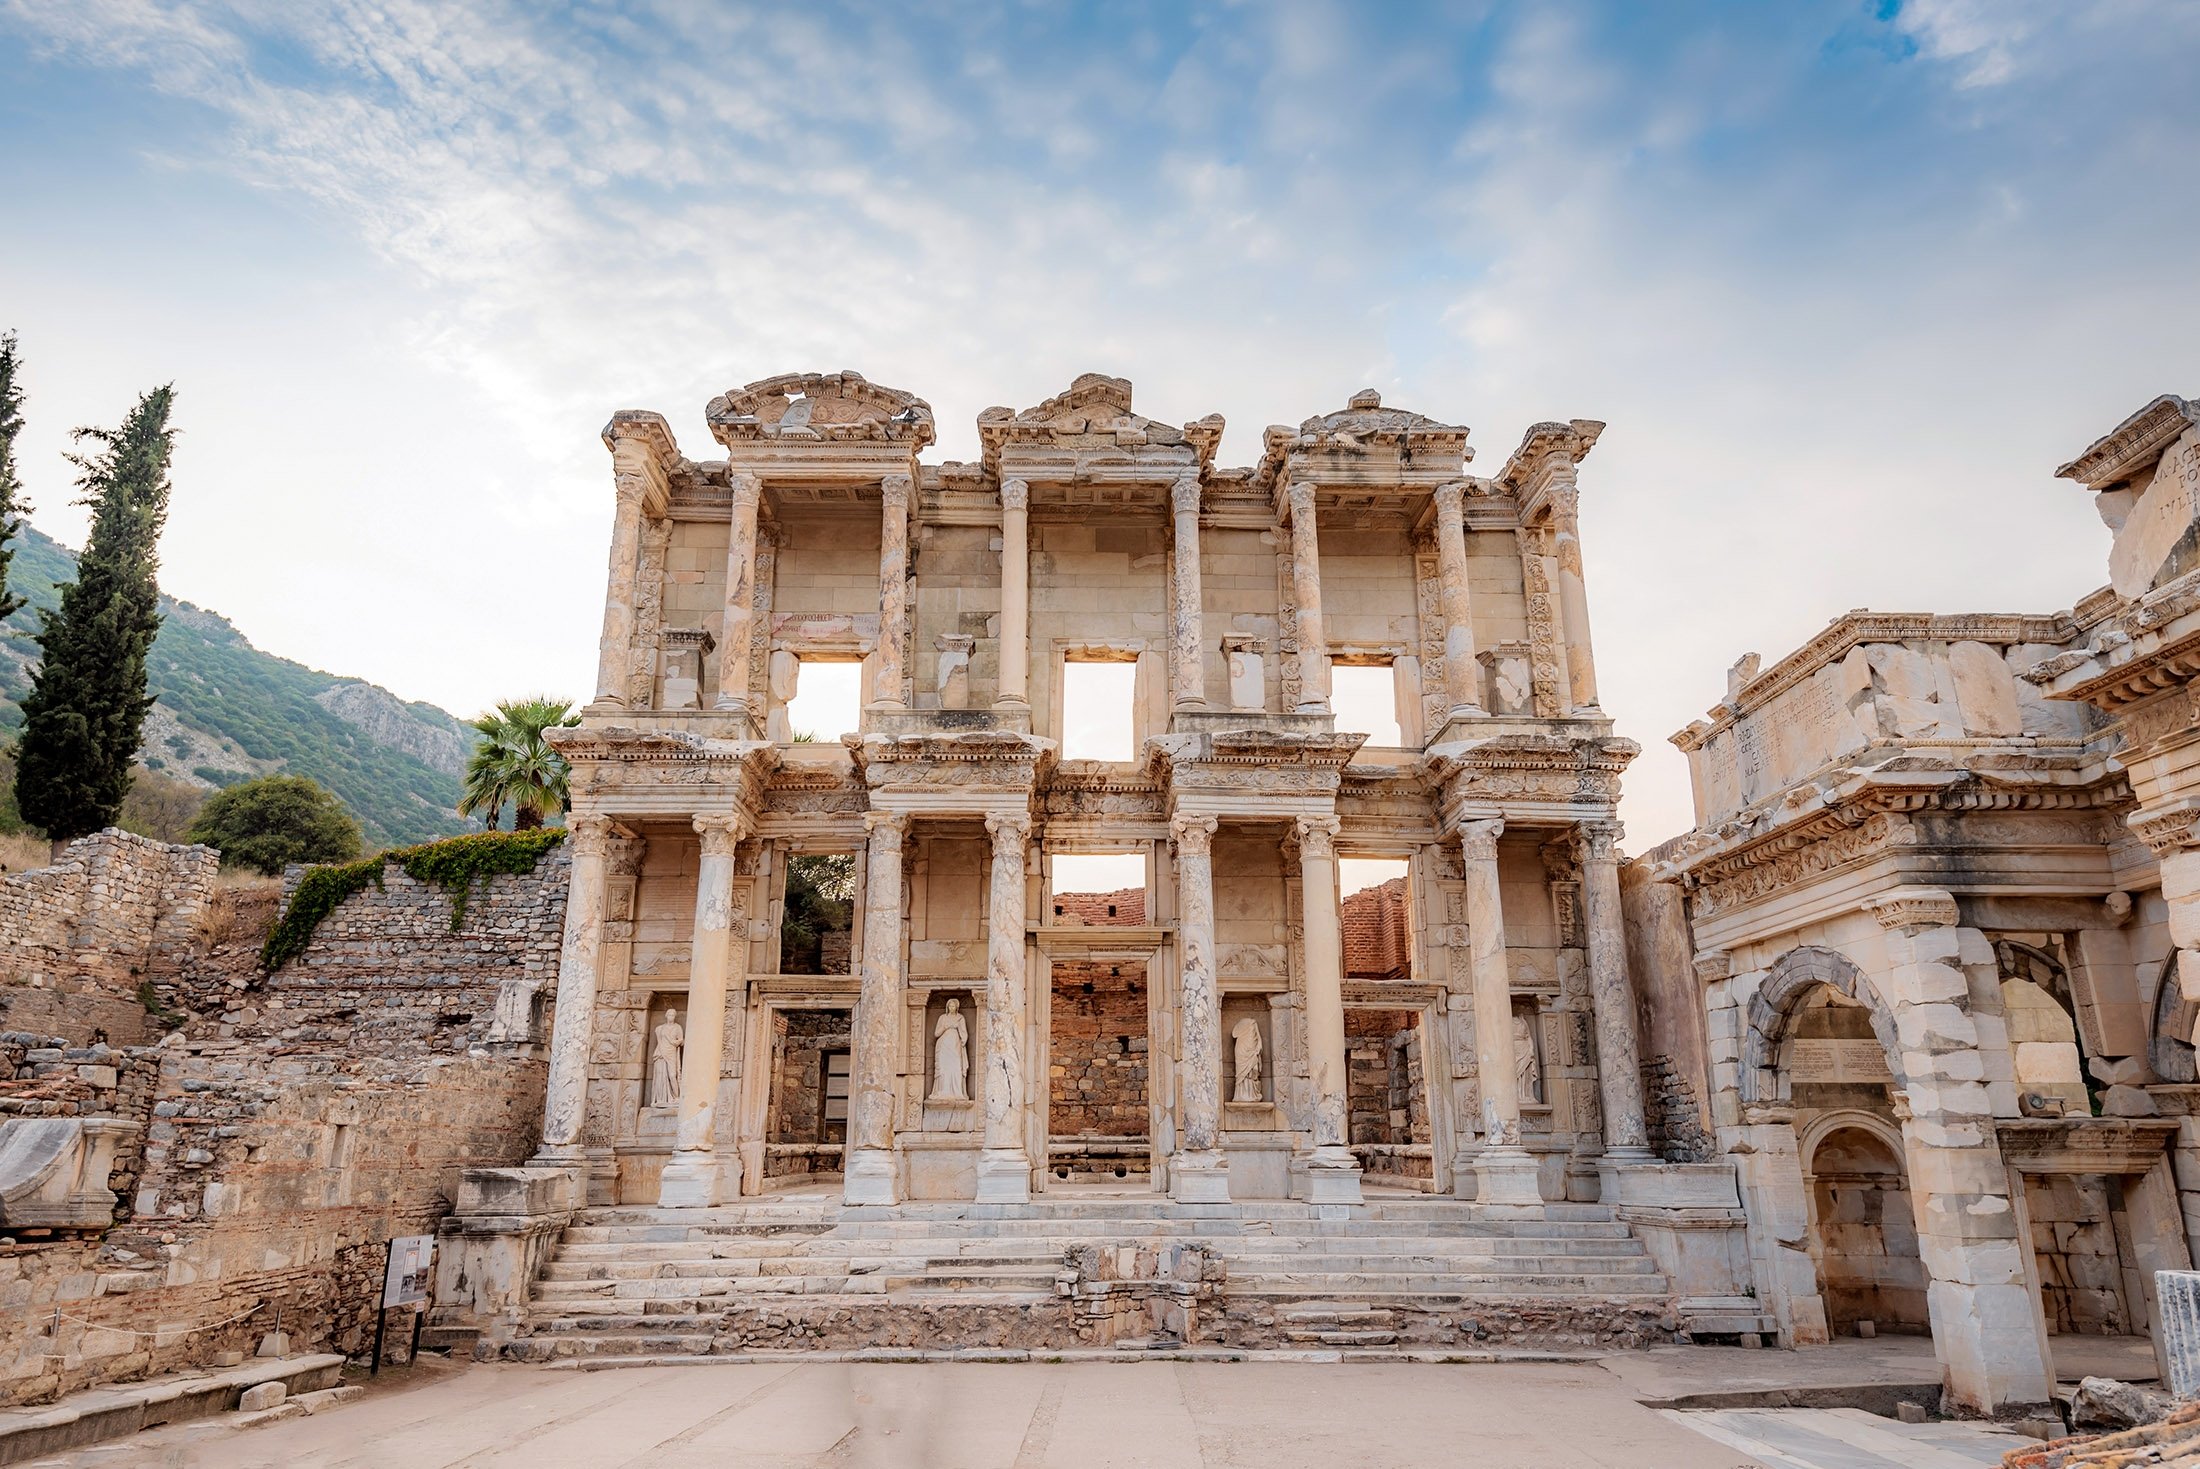 The Celsus Library is one of the many Roman buildings in the ancient city of Ephesus in Izmir, western Turkey. (Shutterstock Photo)